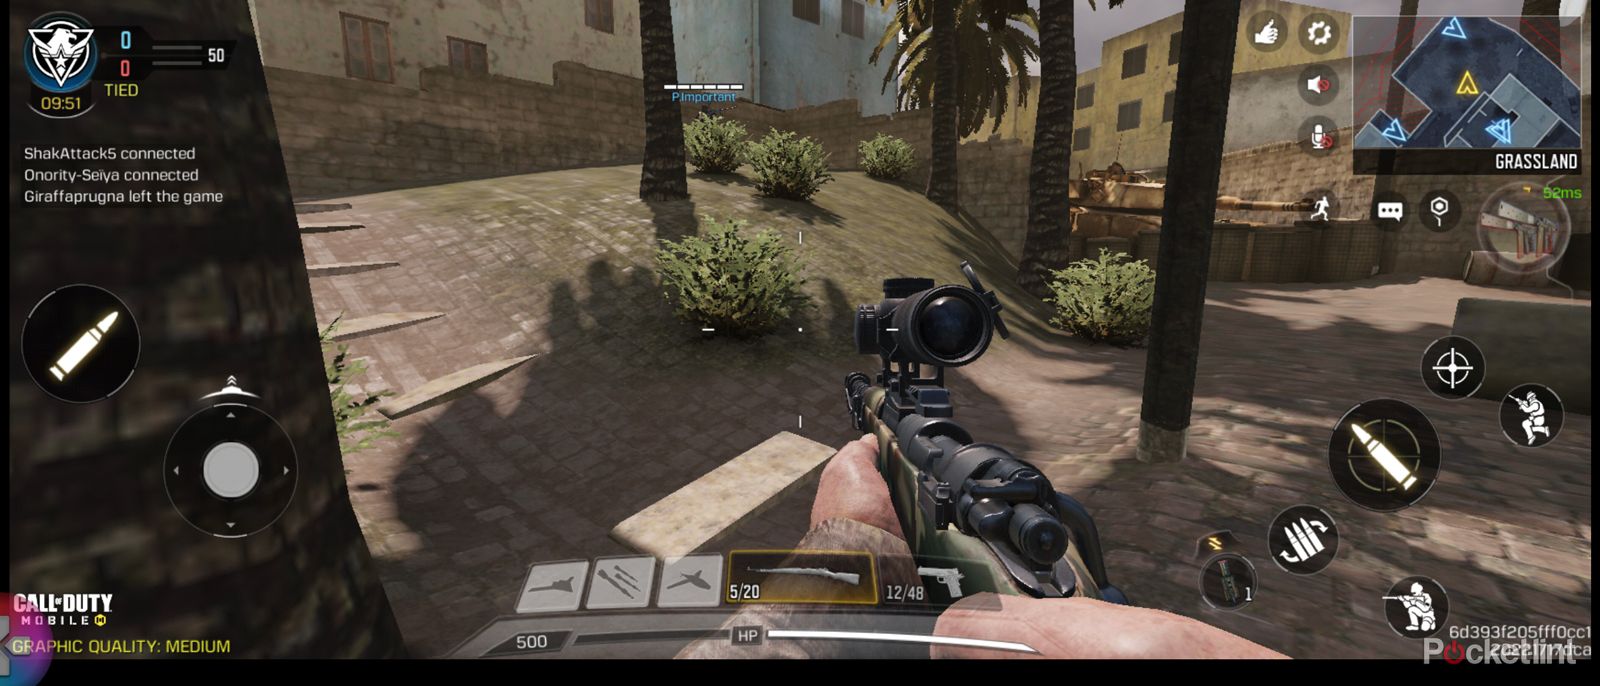 Call of Duty Mobile at 120fps isn't as exciting as you might want it to be photo 3